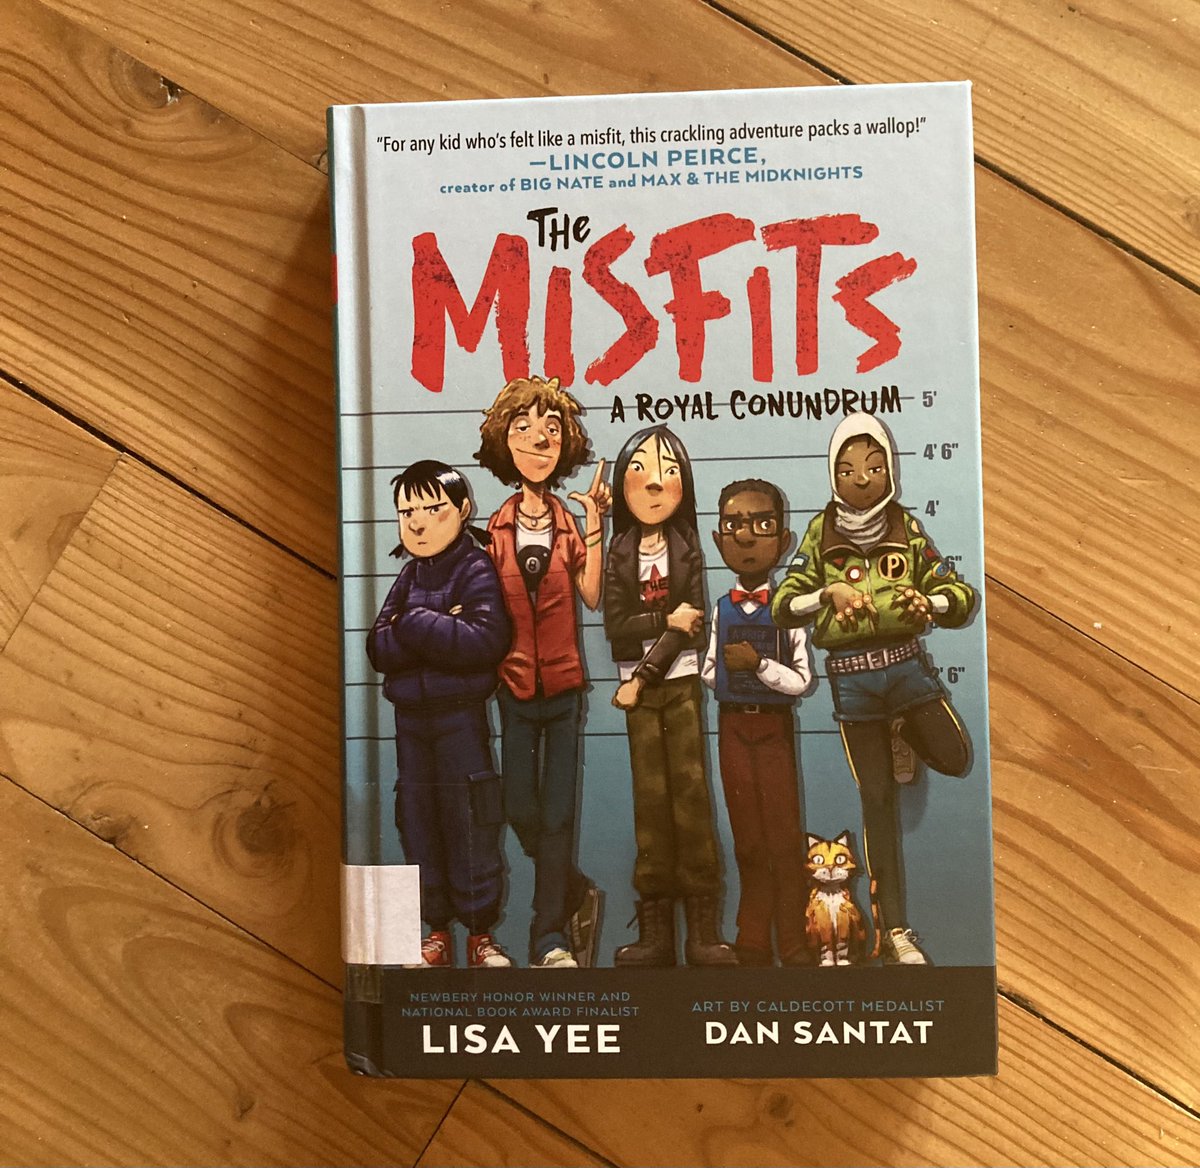 Oof! What a fun book. A grand adventure plus characters you will enjoy as they try to catch a jewel thief. Misfit kids, boarding school, and a whole lot of fun! I’ve got several readers in mind for this one. @LisaYee1 @dsantat